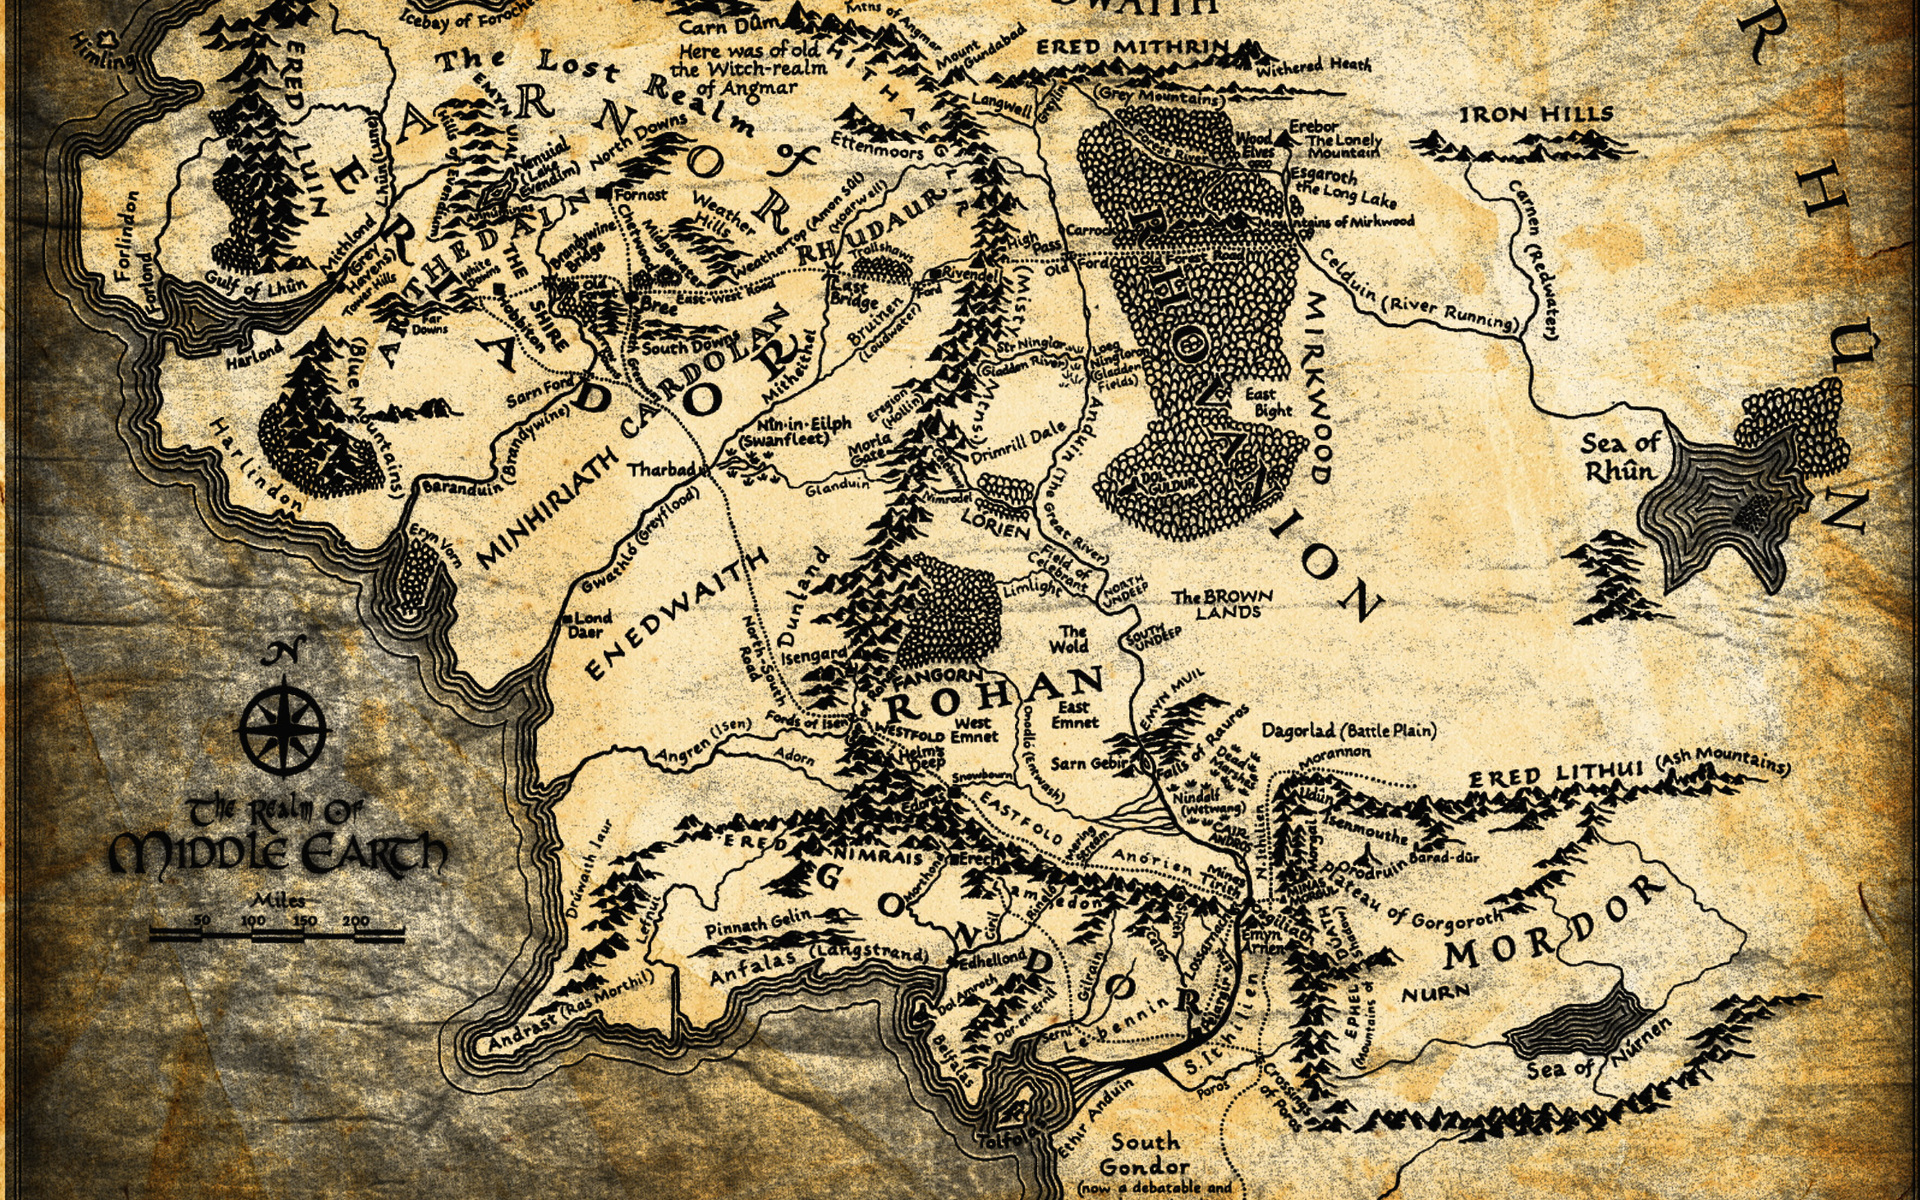 the lord of the rings, lord of the rings, fantasy, map